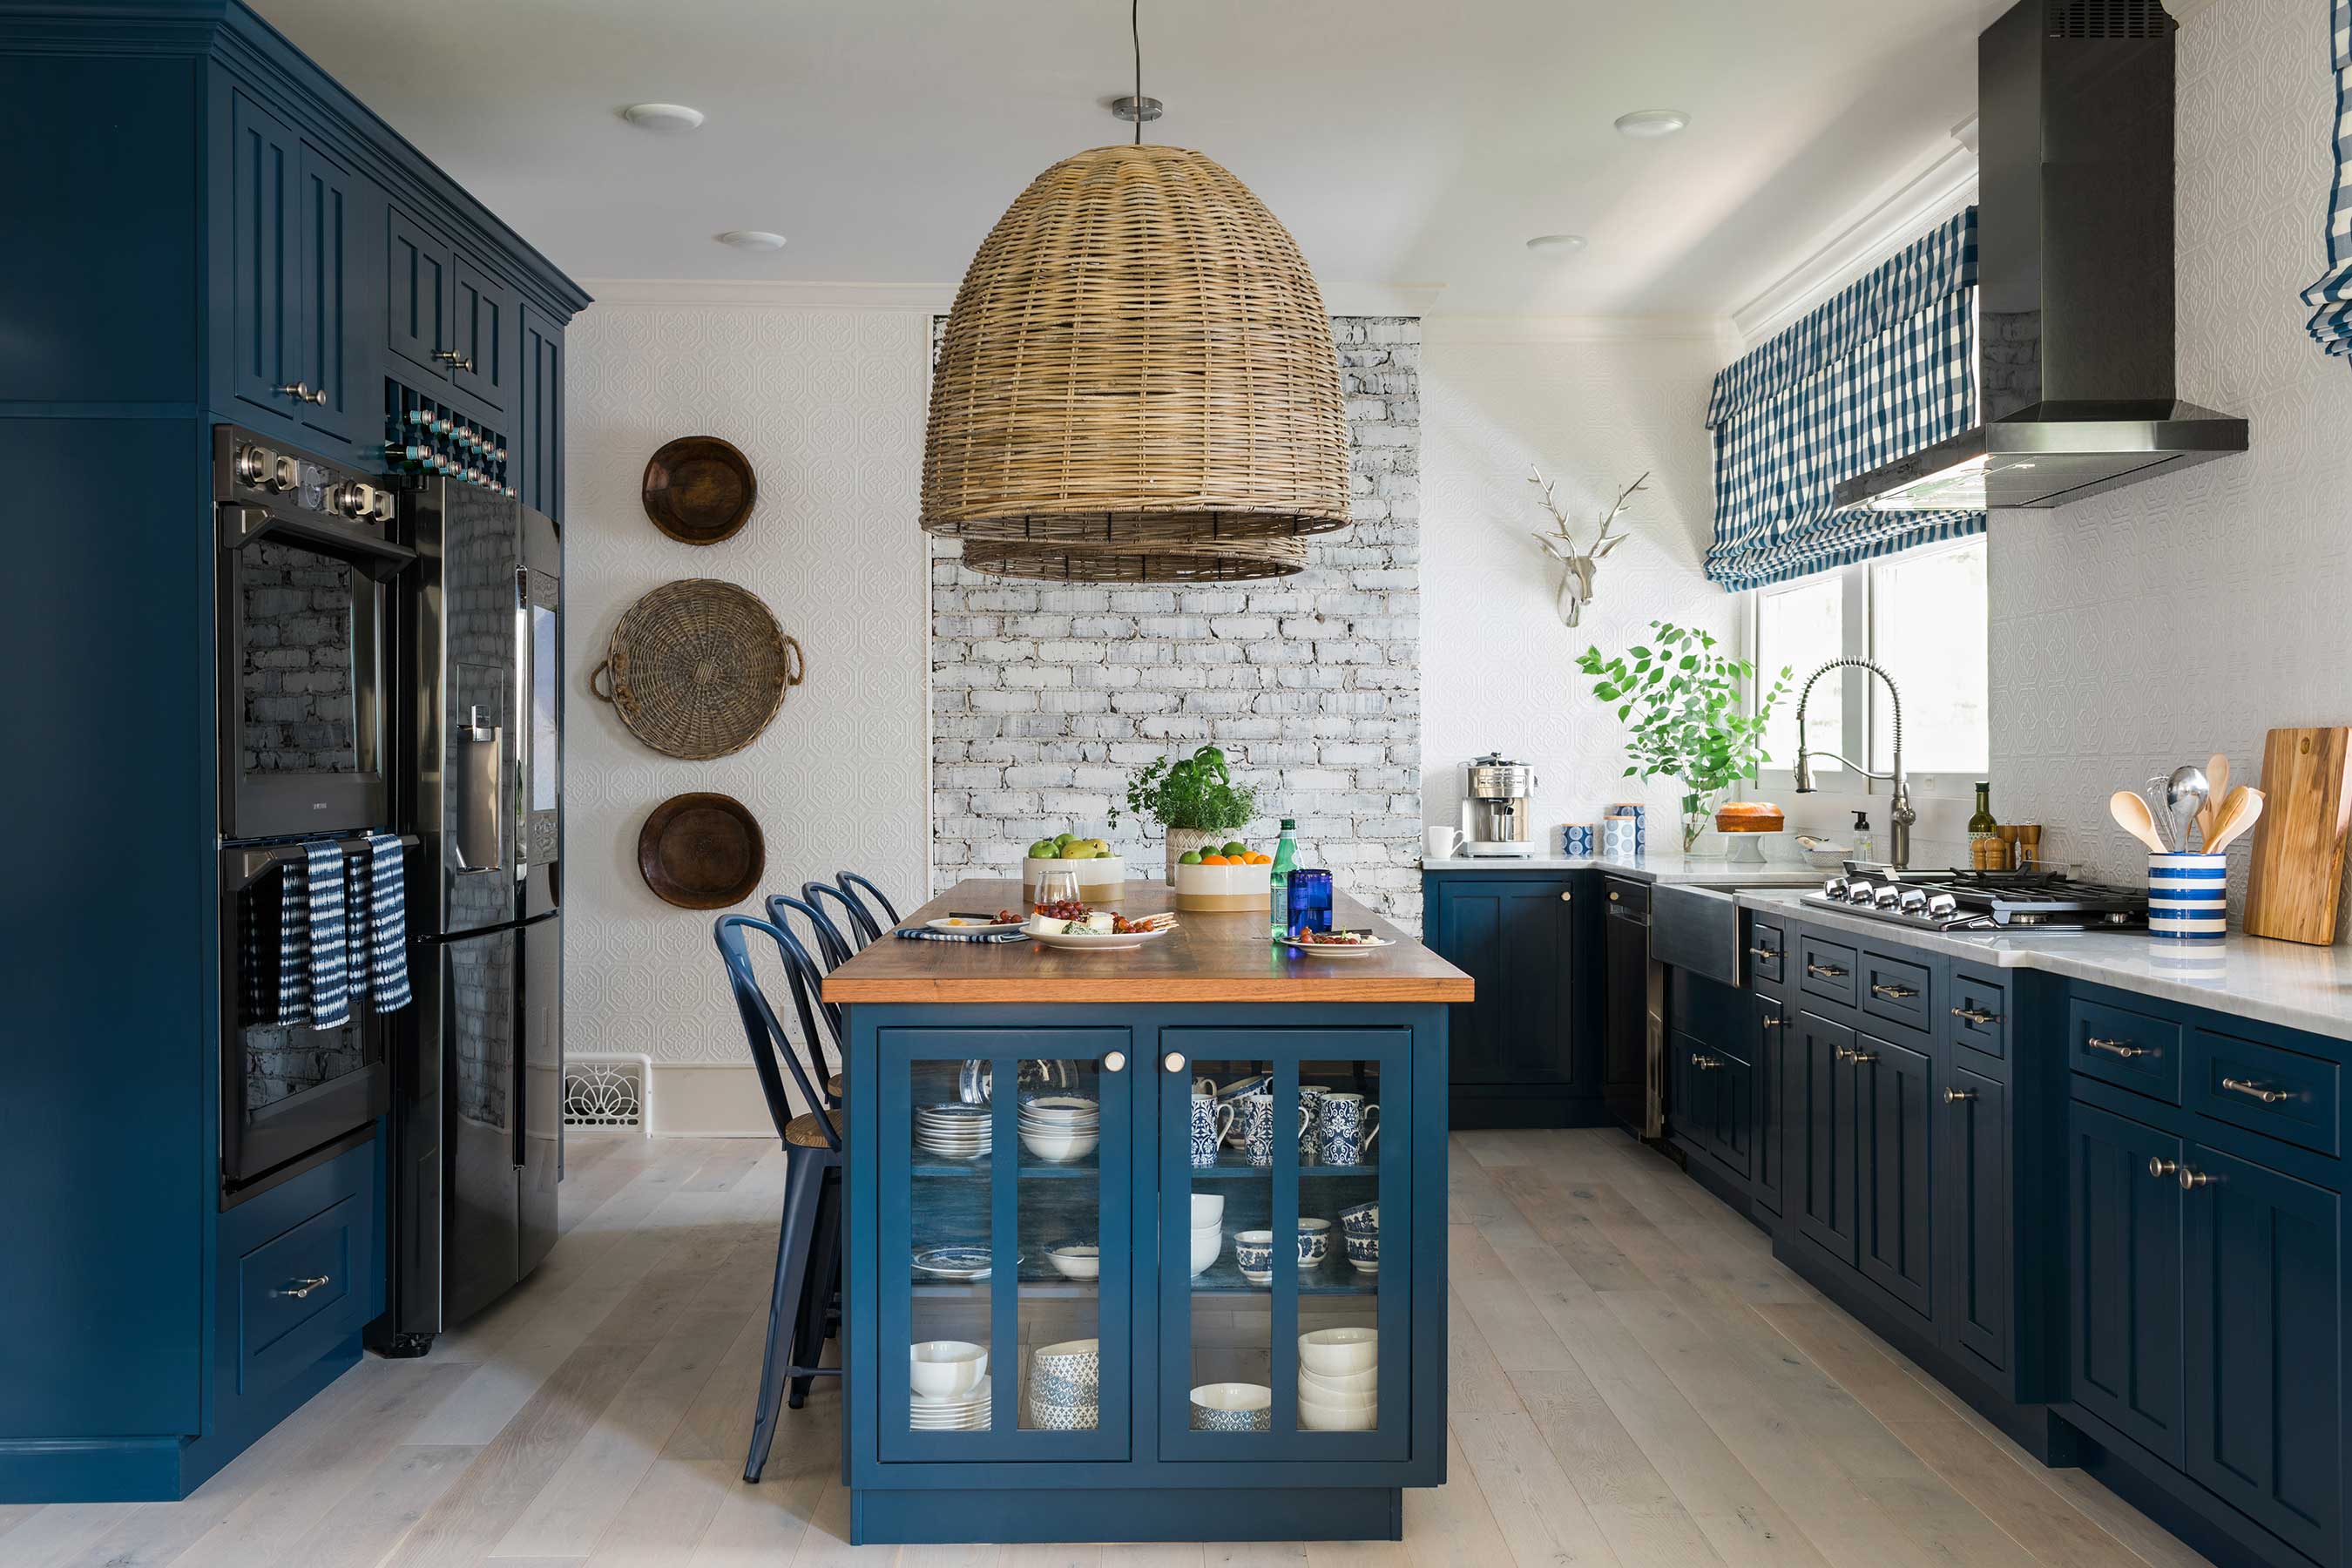 The kitchen of HGTV Urban Oasis 2017 utilizes key architectural elements and a subdued white and blue color scheme to achieve open-concept perfection. An exposed brick wall is whitewashed to serve as a stark backdrop, while bold navy blue cabinets and countertops in both white Carrara marble and black walnut continue the theme of clean, contrasting colors.